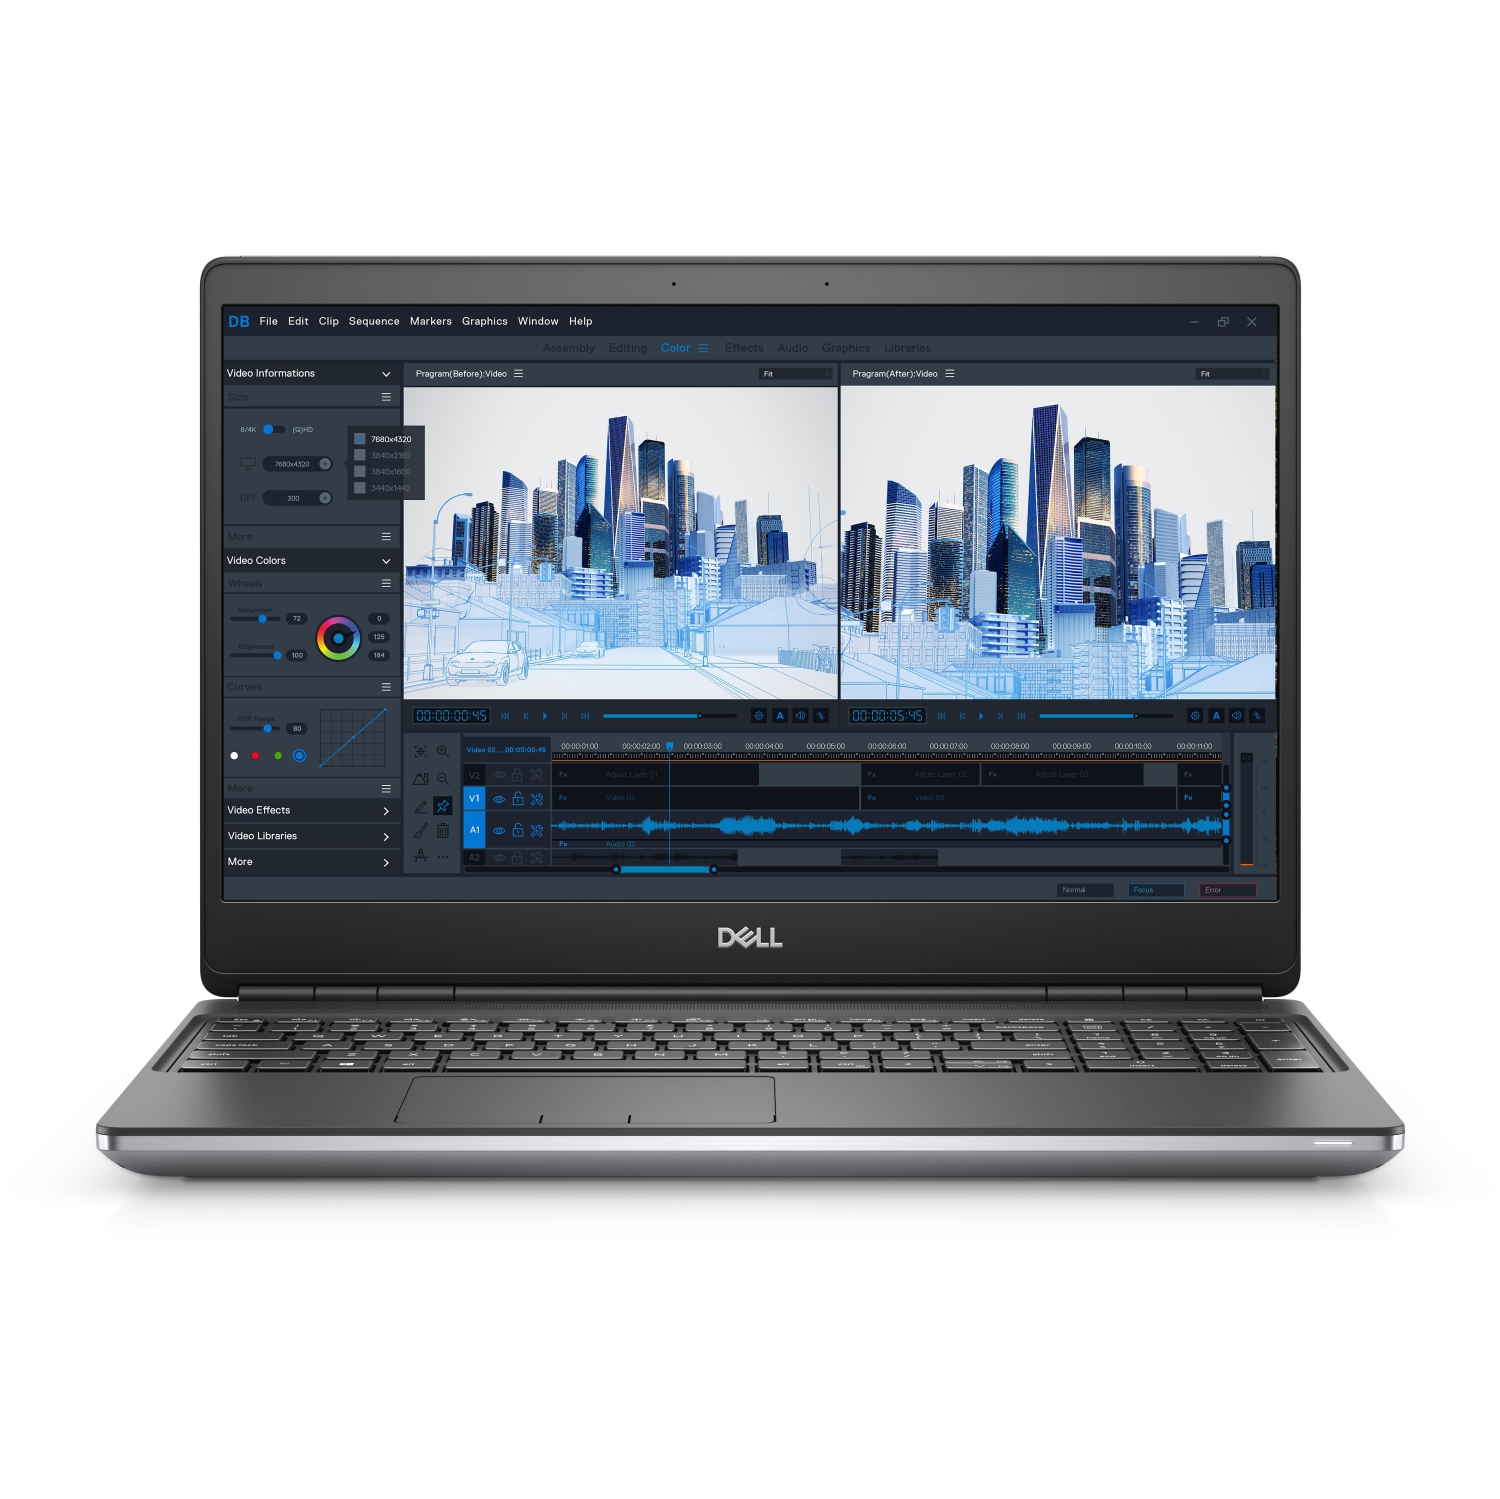 Refurbished (Excellent) - Dell Precision 7000 7560 Workstation Laptop (2021), 15.6" FHD, Core i7, 512GB SSD, 32GB RAM, RTX A3000, 4.6 GHz, 11th Gen CPU Certified